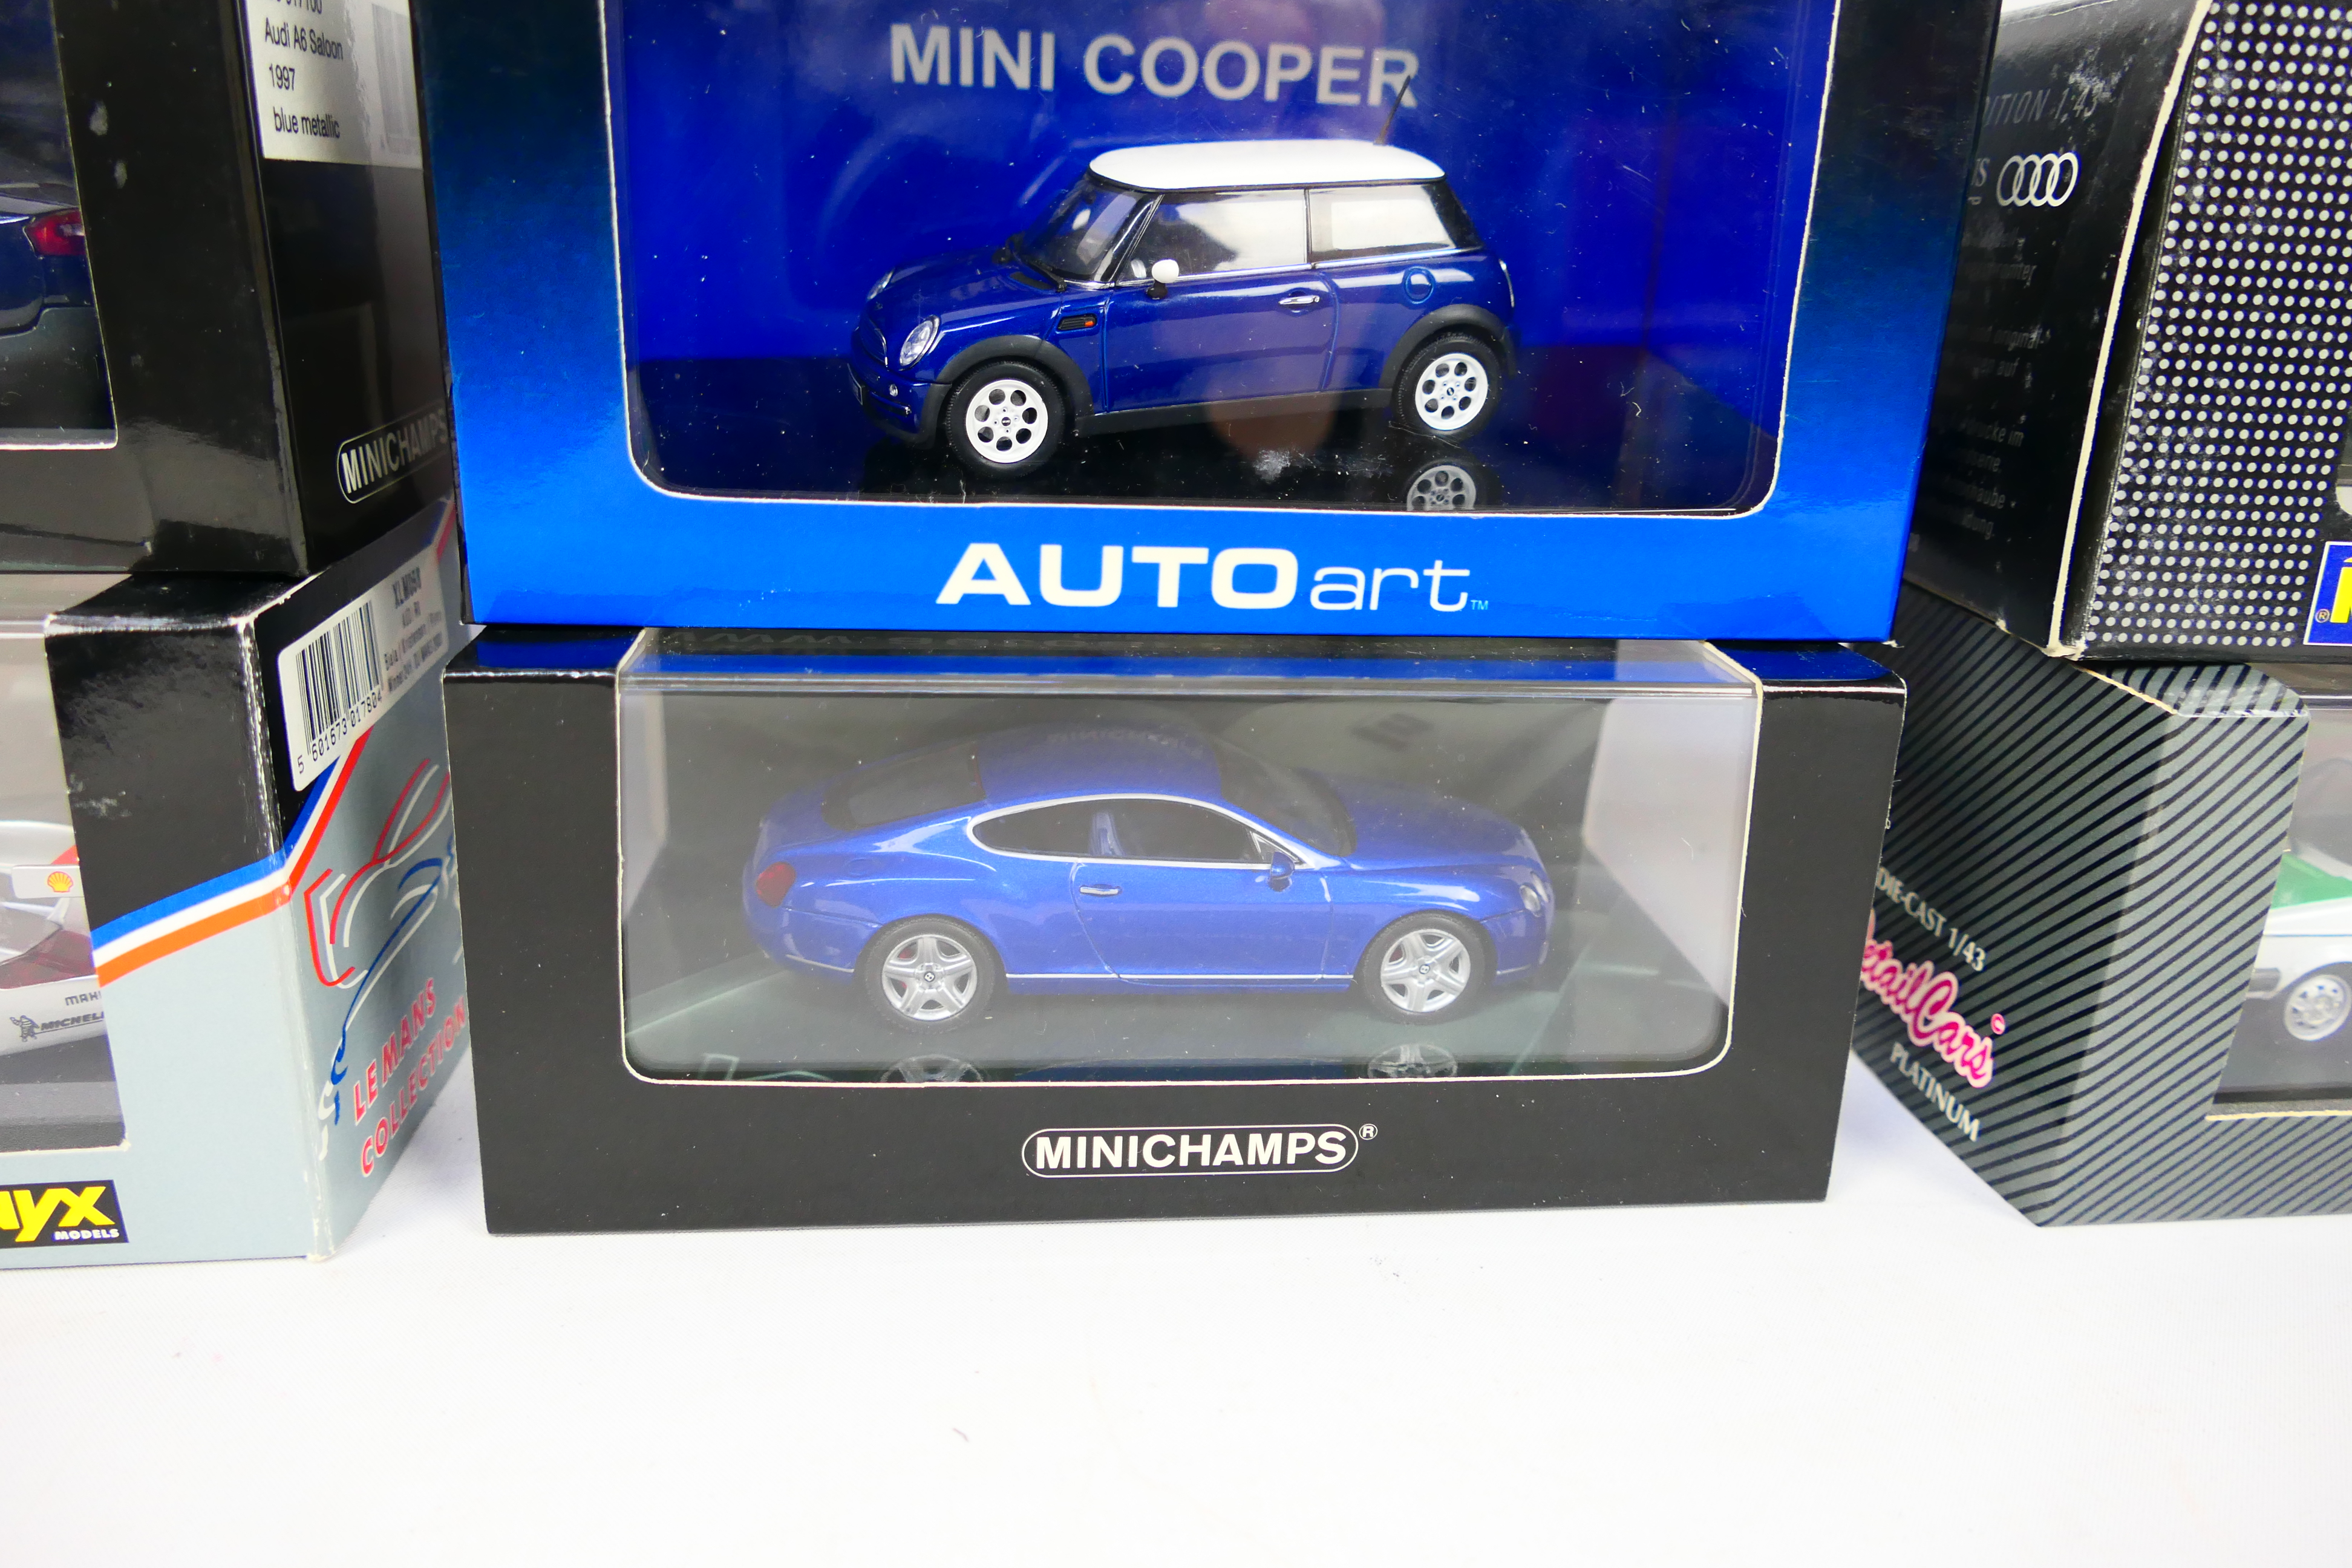 Minichamps - AutoArt - Revell - Detail Cars - Six boxed diecast 1:43 scale model vehicles. - Image 5 of 10